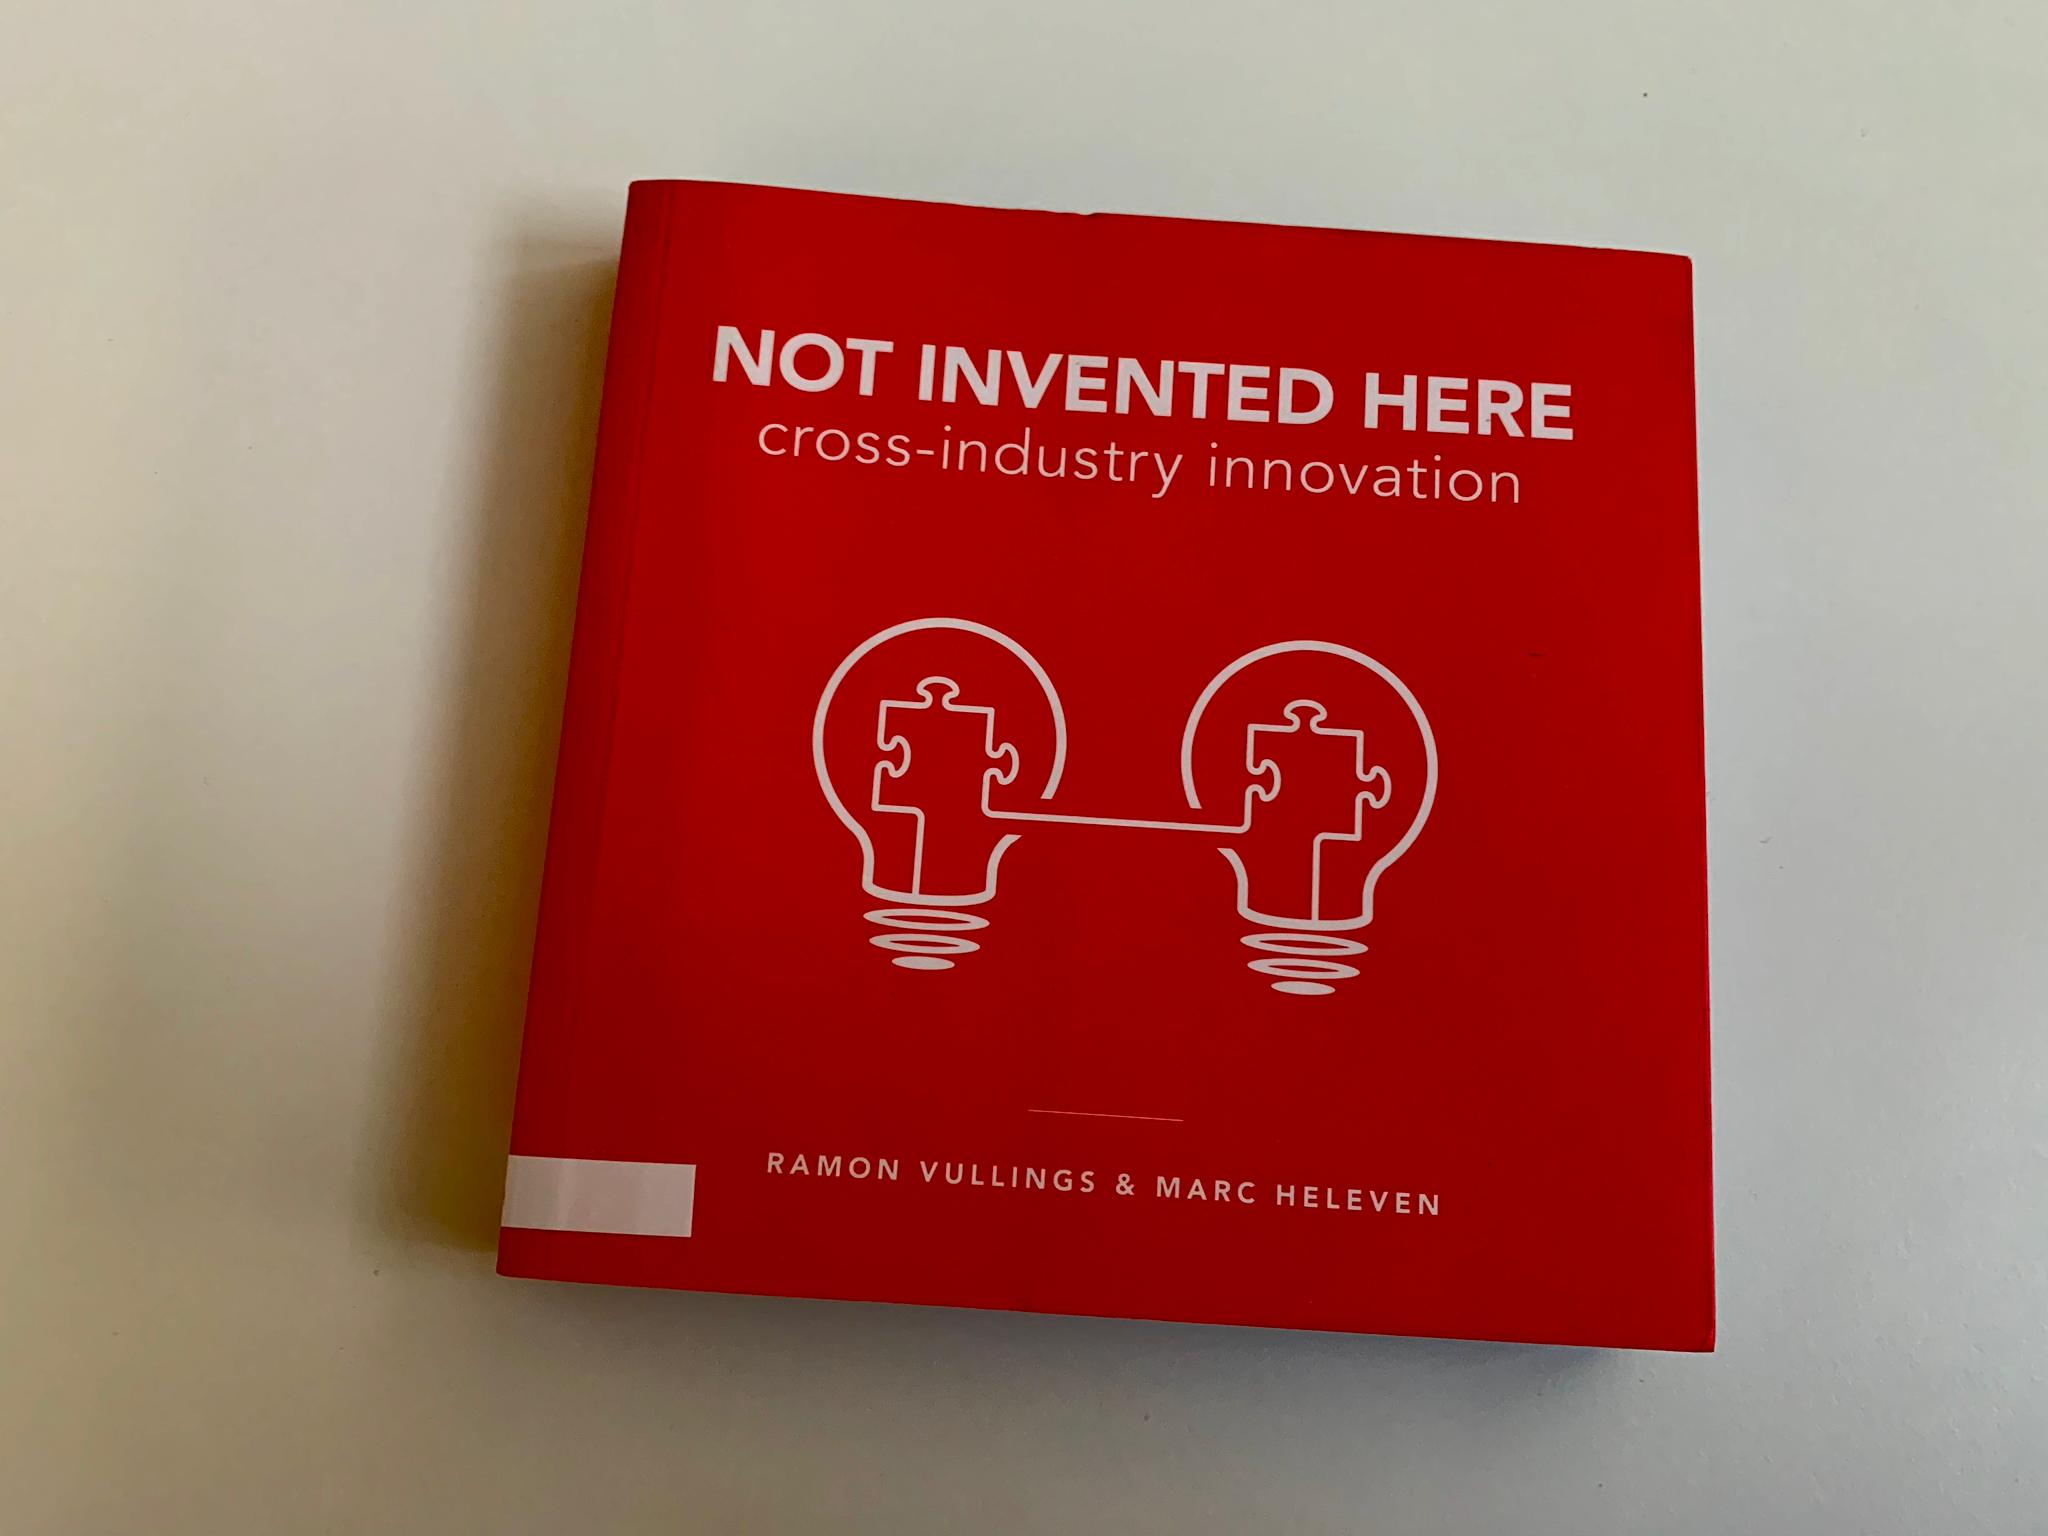 Livre sur l'innovation intersectorielle - Not invented here